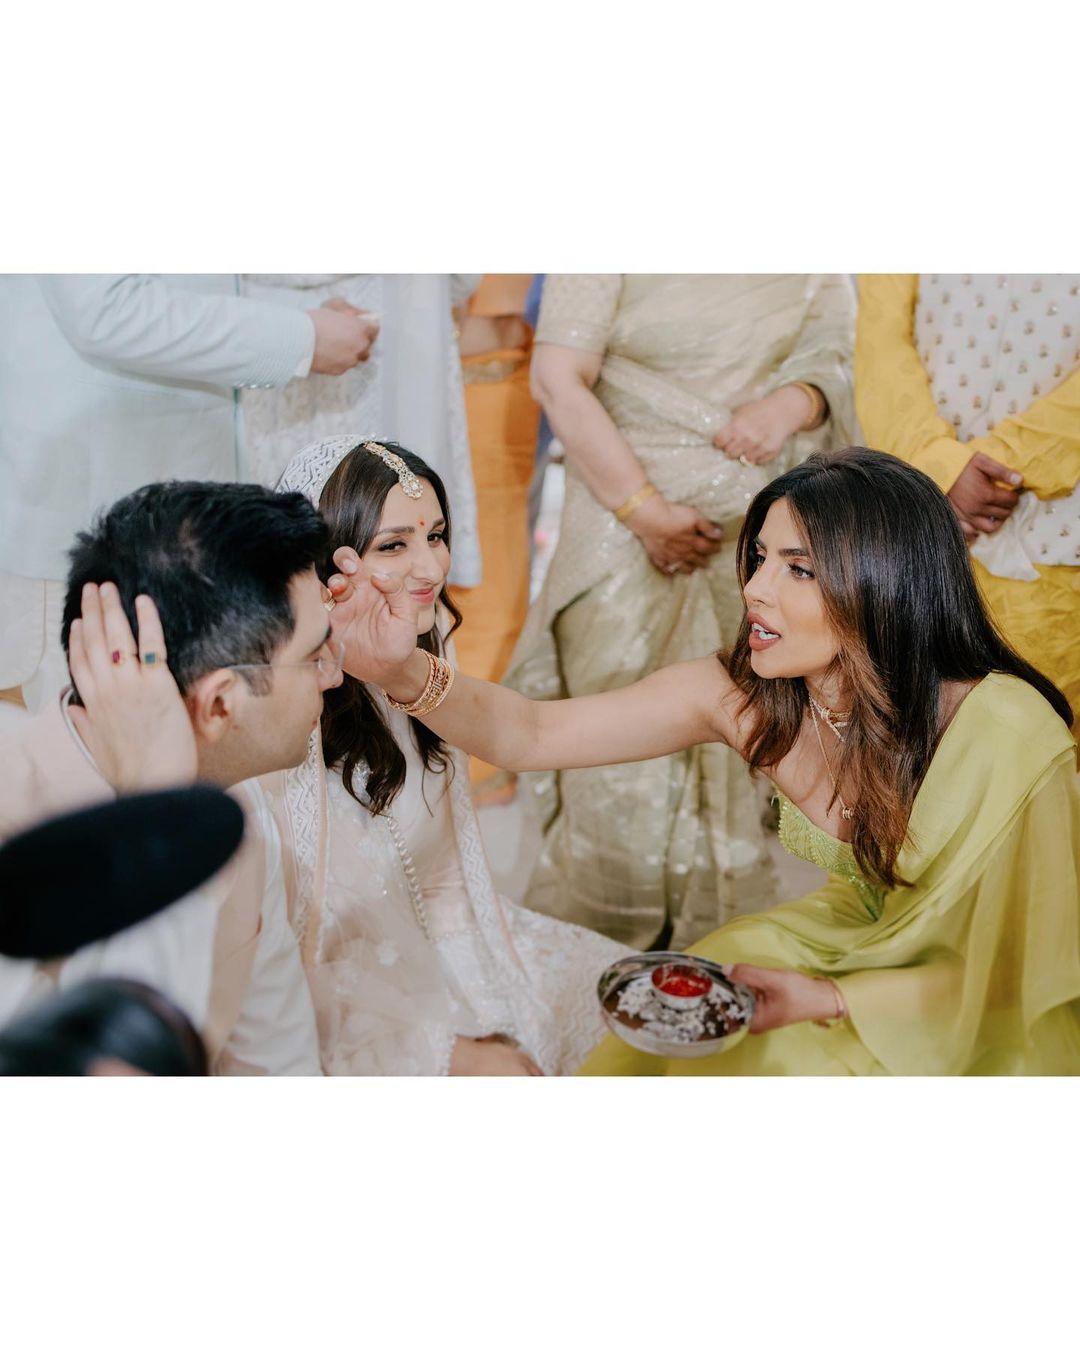 In the pictures shared by the bride-to-be, Priyanka was seen doing tikka to the Dulhe raja